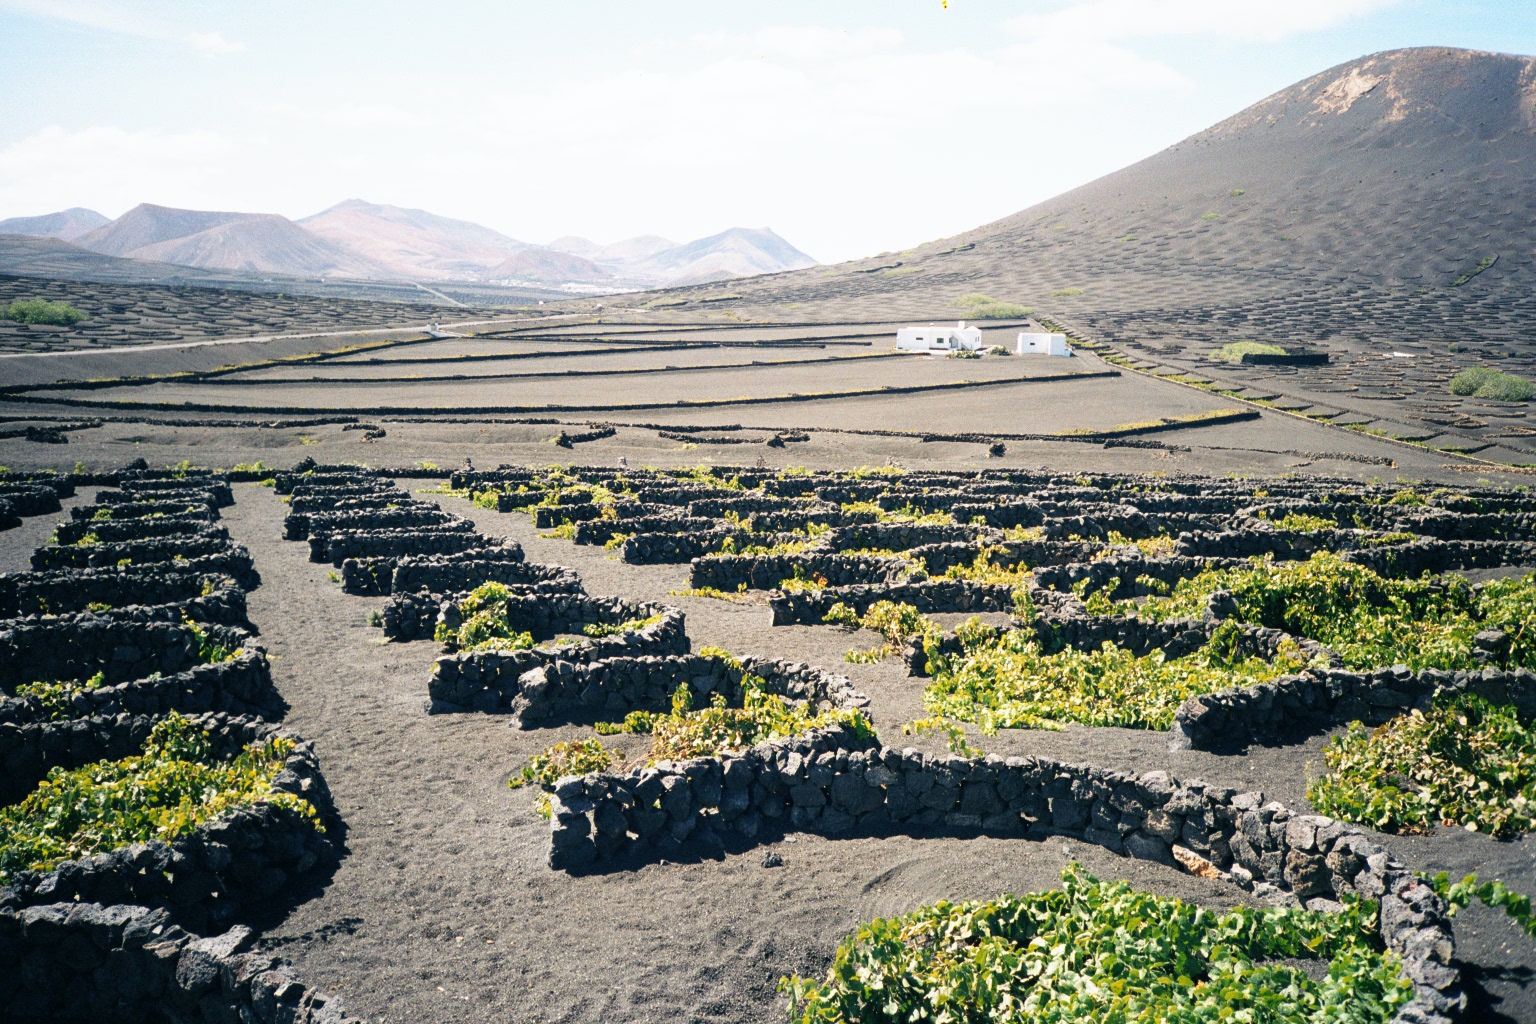 OCTOBER 2017. The Geology Today Magazine published a study, highlighting the cultivation technique developed in Lanzarote to export to other arid areas